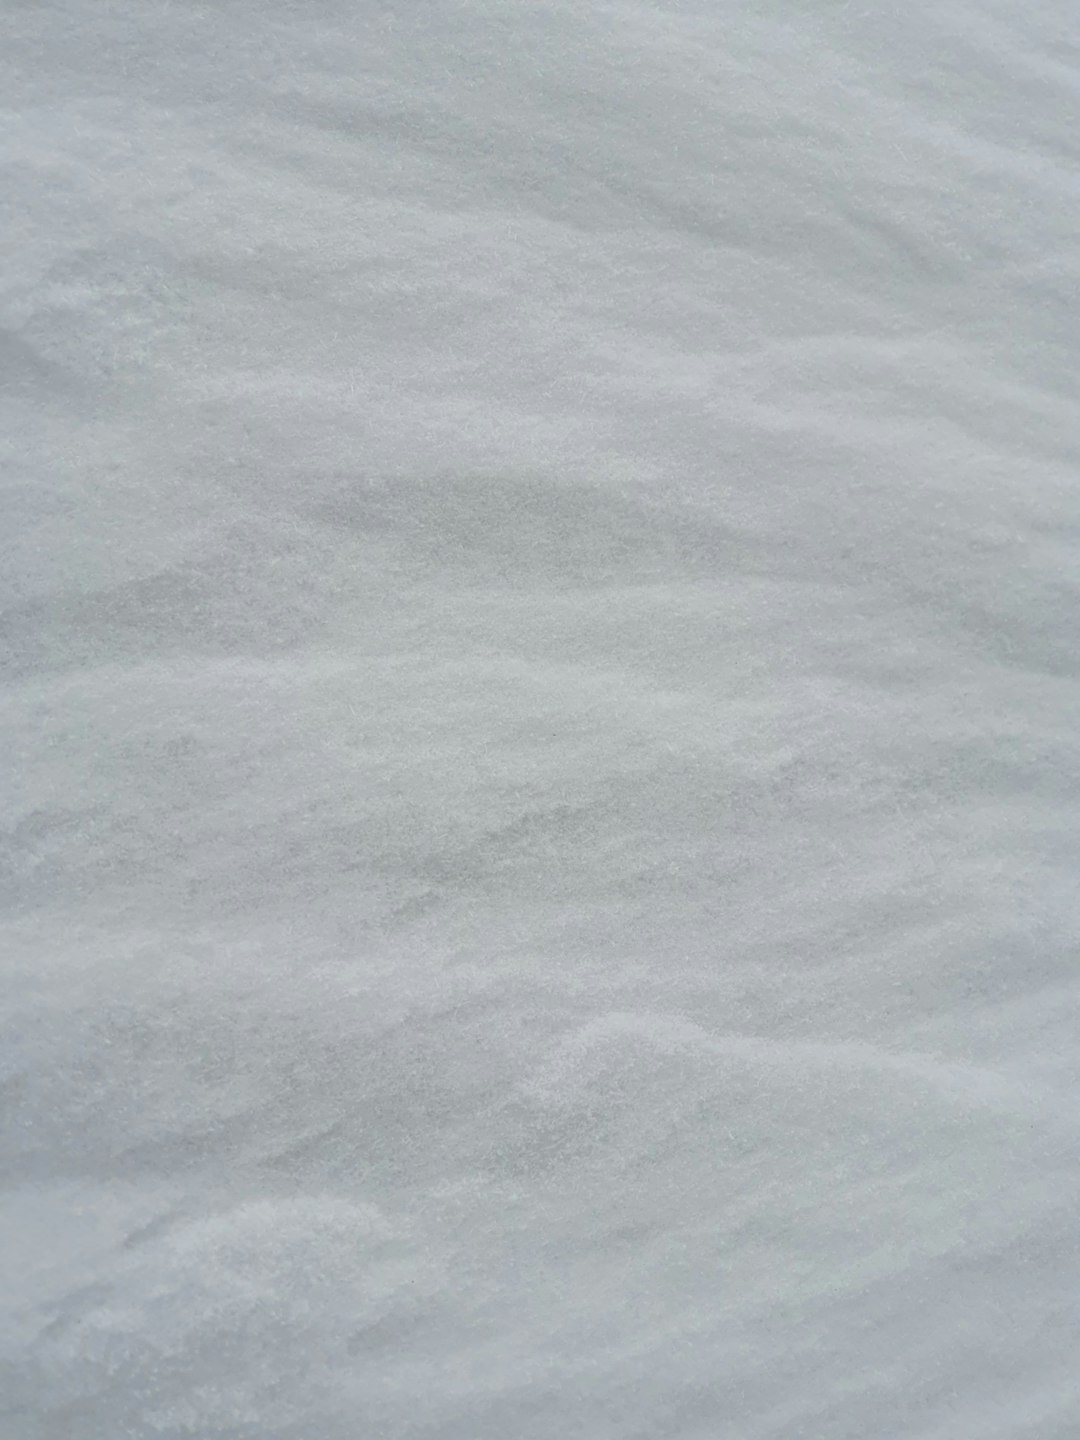 Snow Texture Pictures | Download Free Images on Unsplash